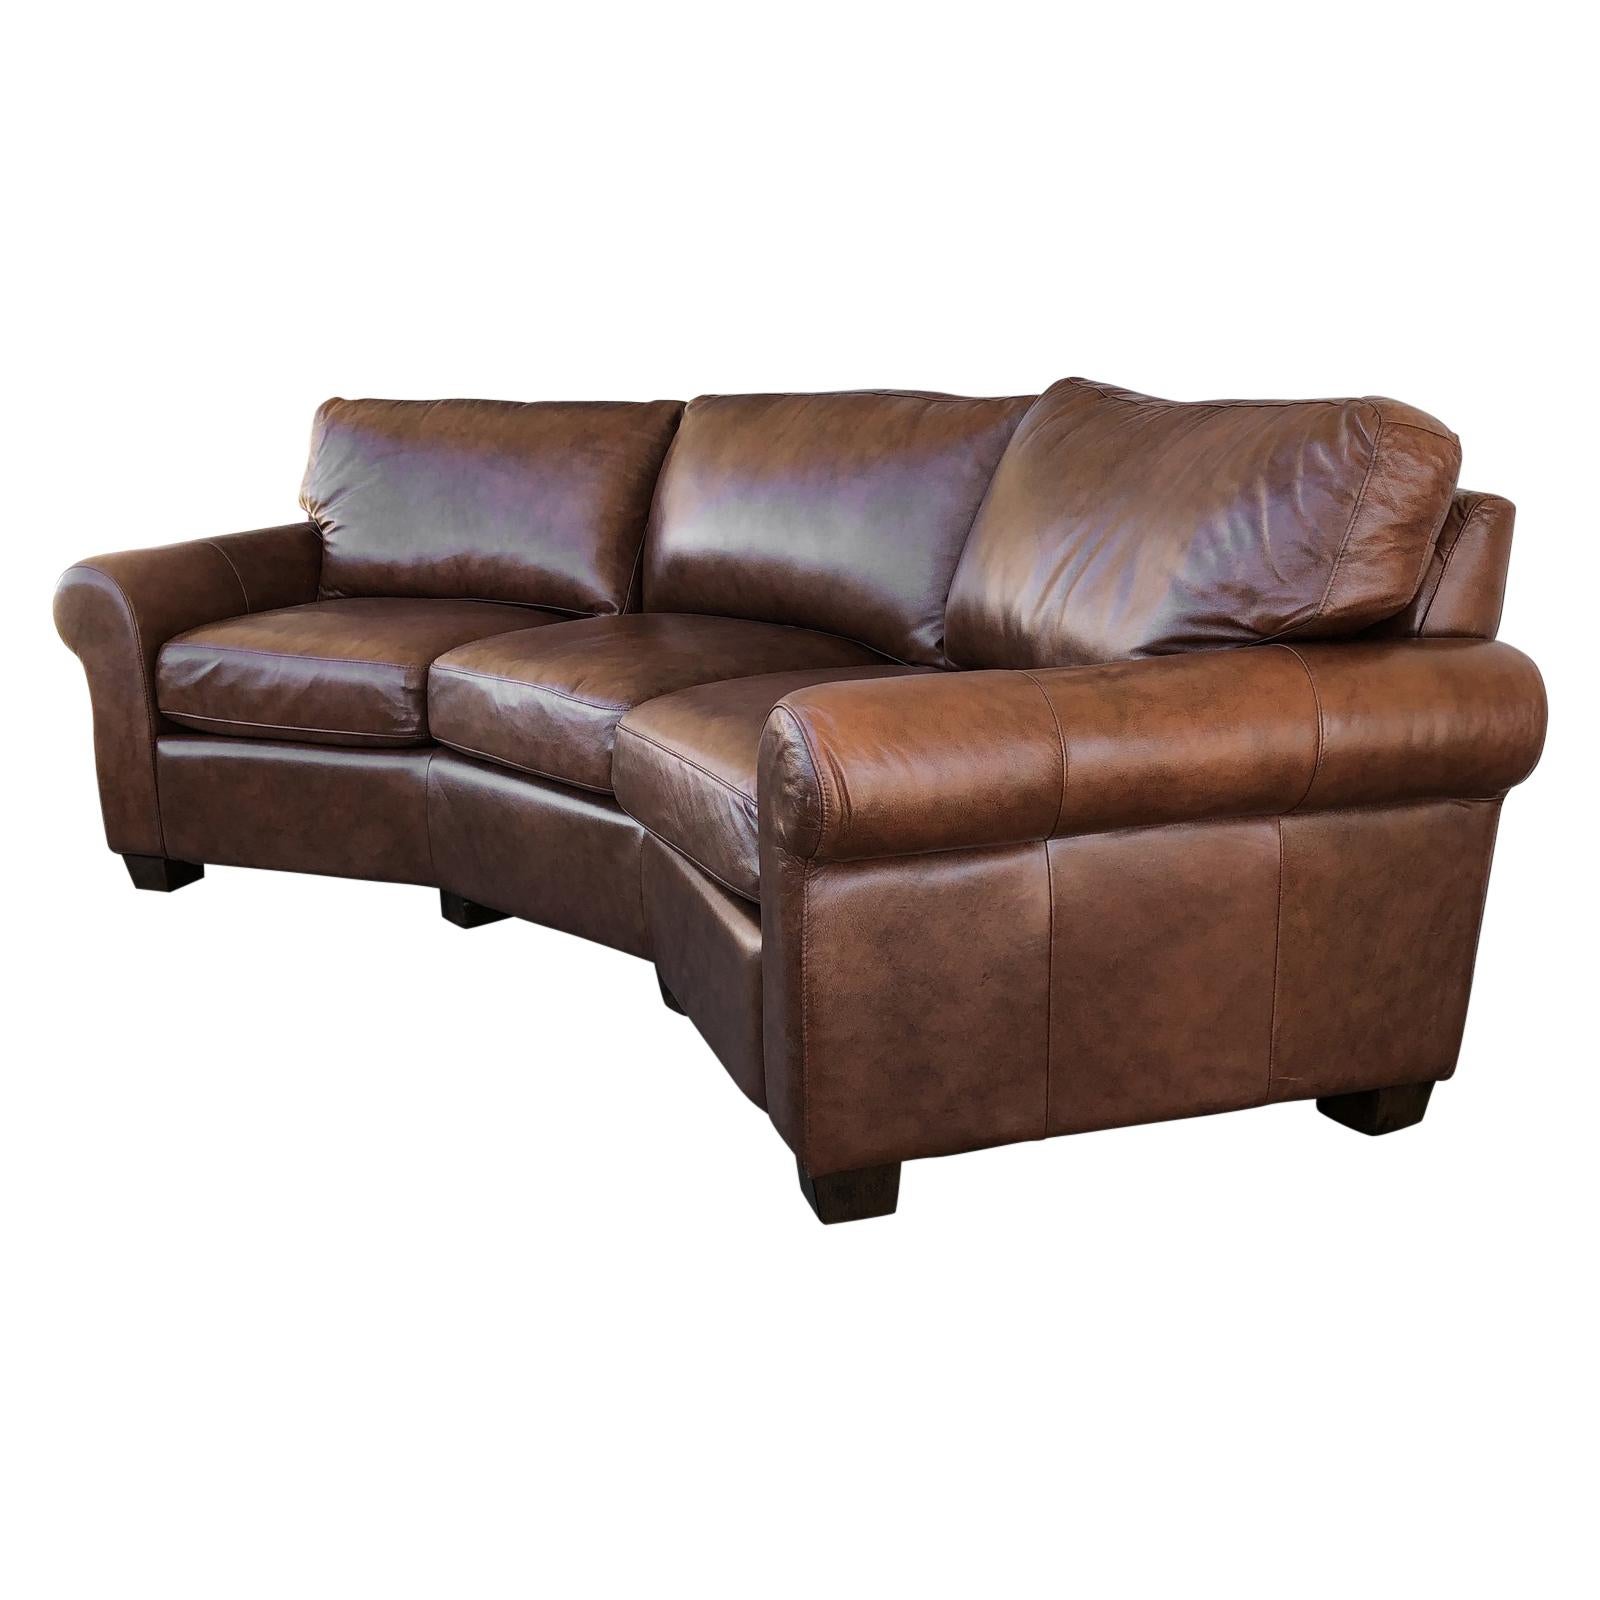 Custom Curved Leather Sofa by Omnia Leather